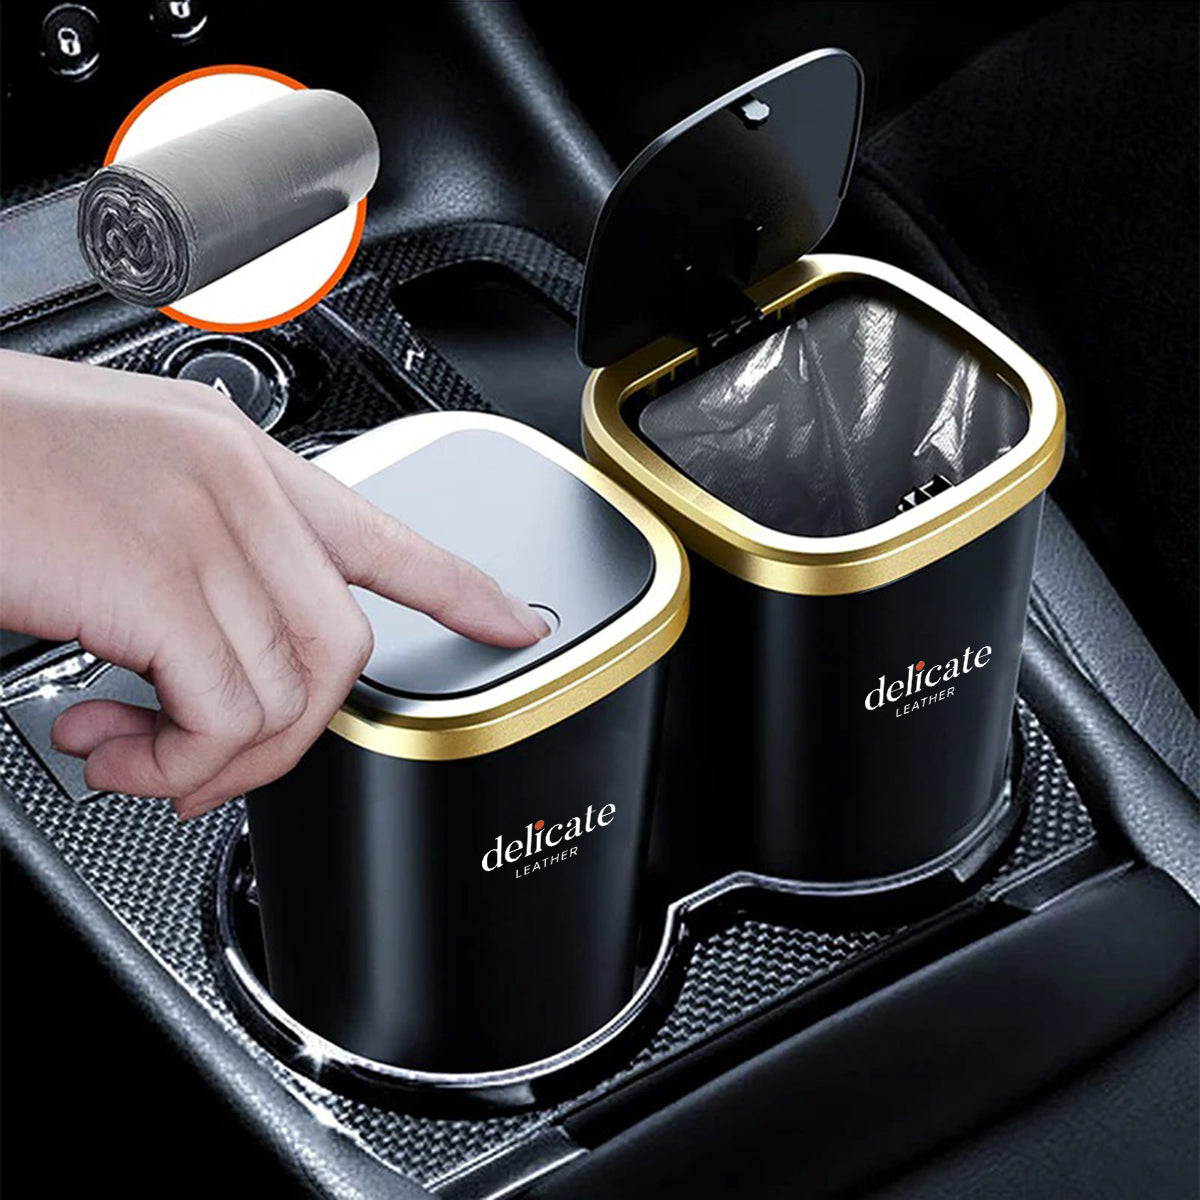 Car Trash Cans, Custom For Your Cars, Compact & Durable Car Accessories for Interior Use 2 Pack, Practical Car Organizers and Storage Cups with Pop-Up Open, Car Accessories MY11993 - Delicate Leather